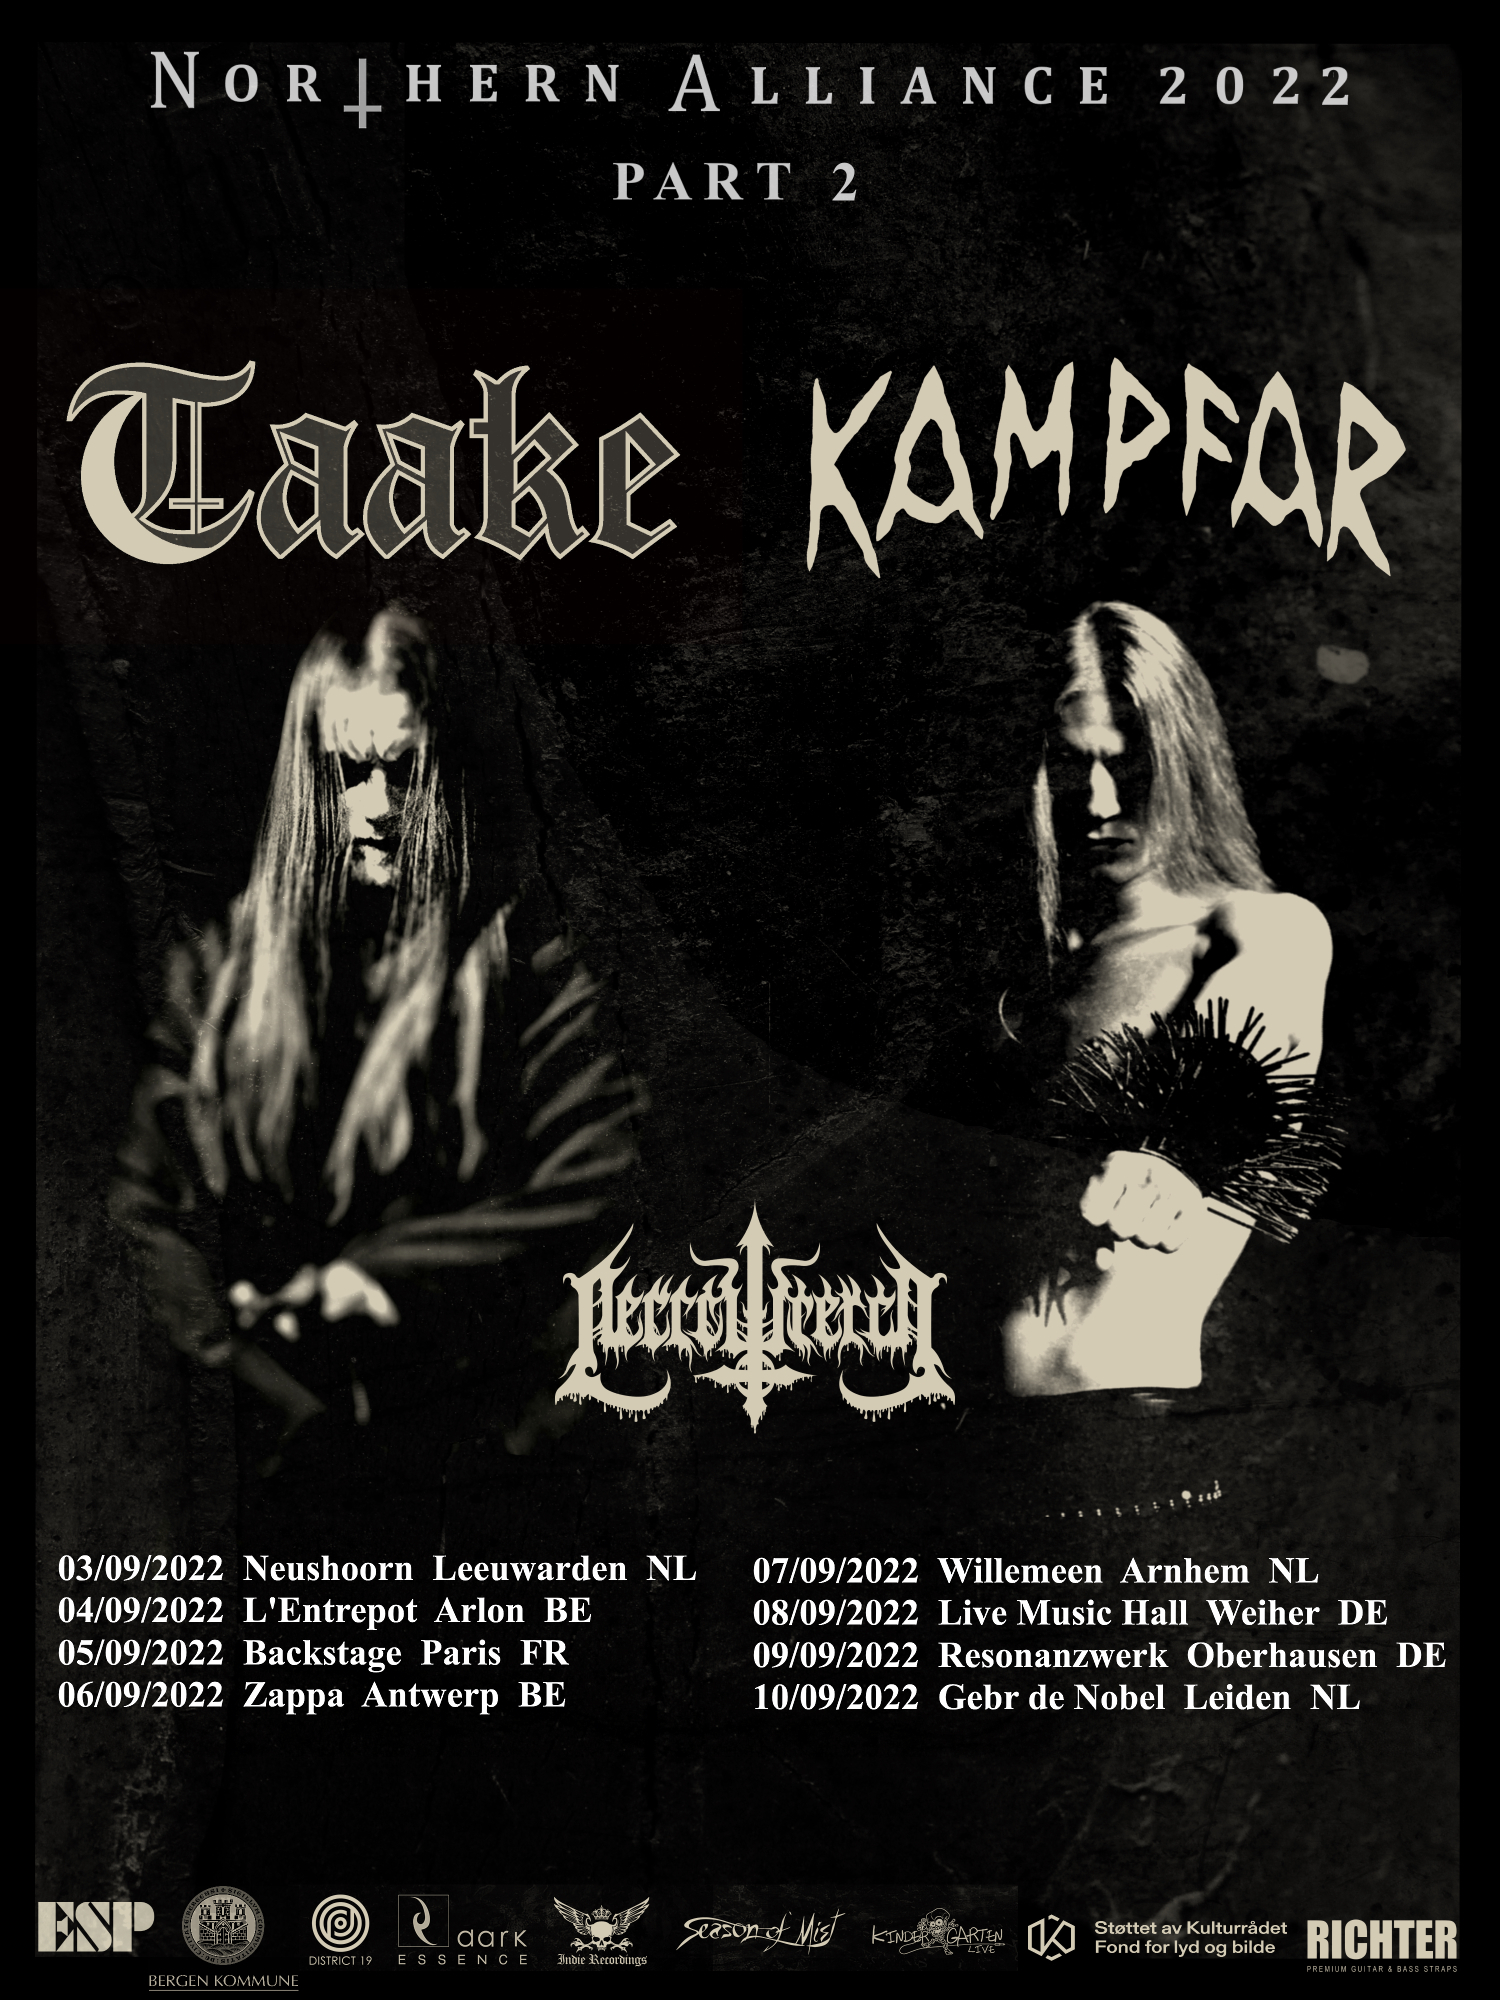 New dates for the postponed TAAKE & KAMPFAR tour